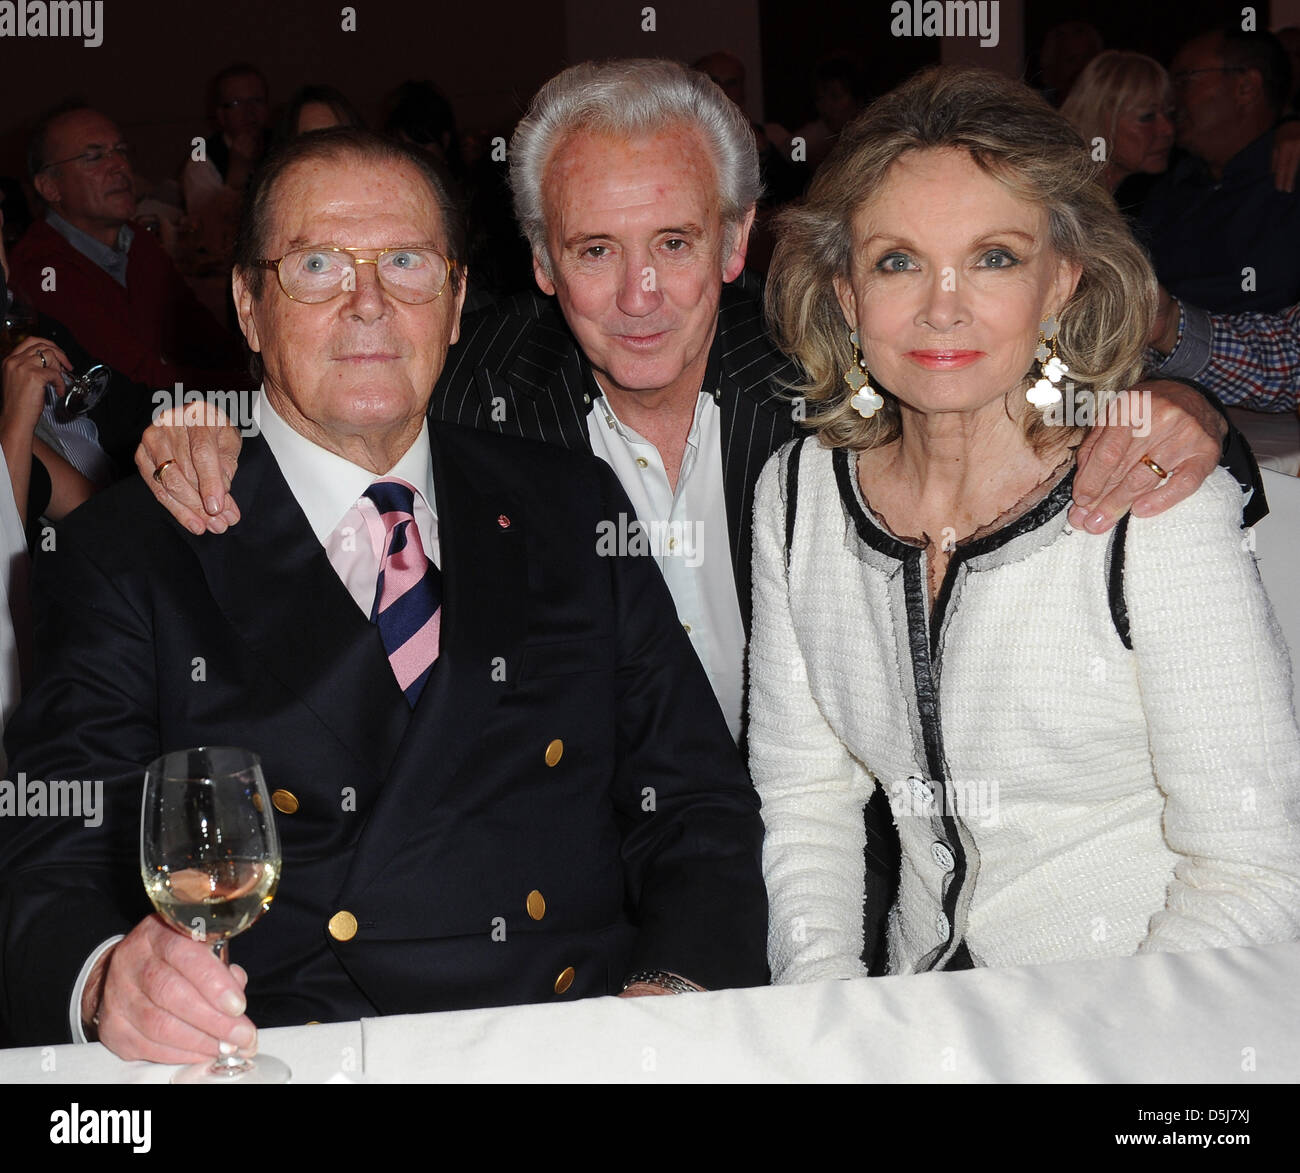 British actor Sir Roger Moore (l), his wife Kristina Tholstrup (r) and British singer Tony Christie (M) talk at the Get Together Party of the Hermes Eagles Golf cup at Nobilis Robinson Club in Belek, Turkey, 16 November 2012. Celebrities from sports, film and economy play for foundations such as the childrens emergency funds and the Beckenbauer foundation. Photo: Ursula Dueren Stock Photo